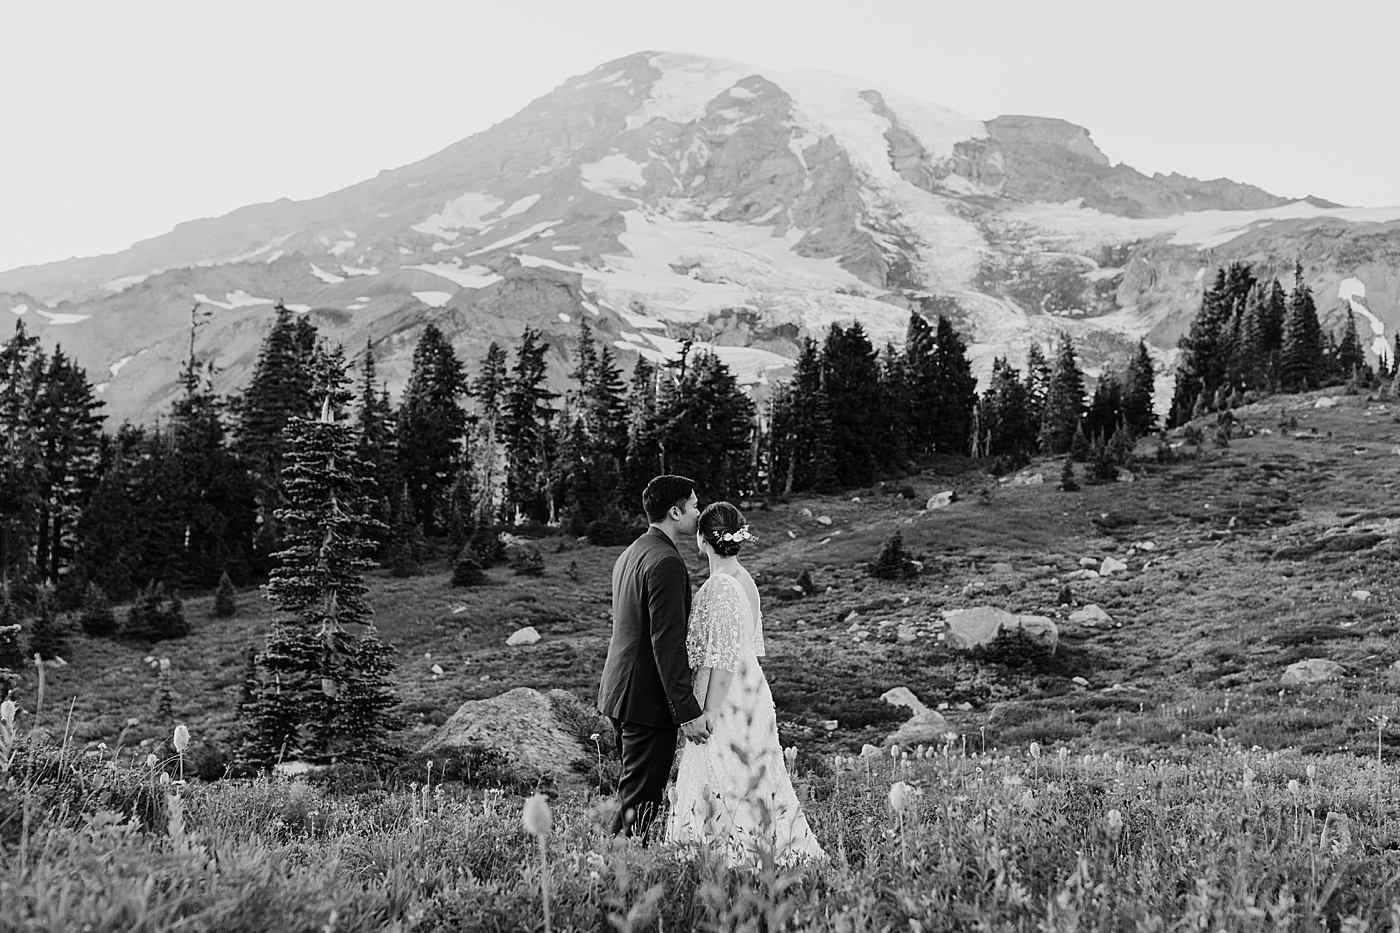 Elopement in the mountains. Photo by Megan Montalvo Photography.